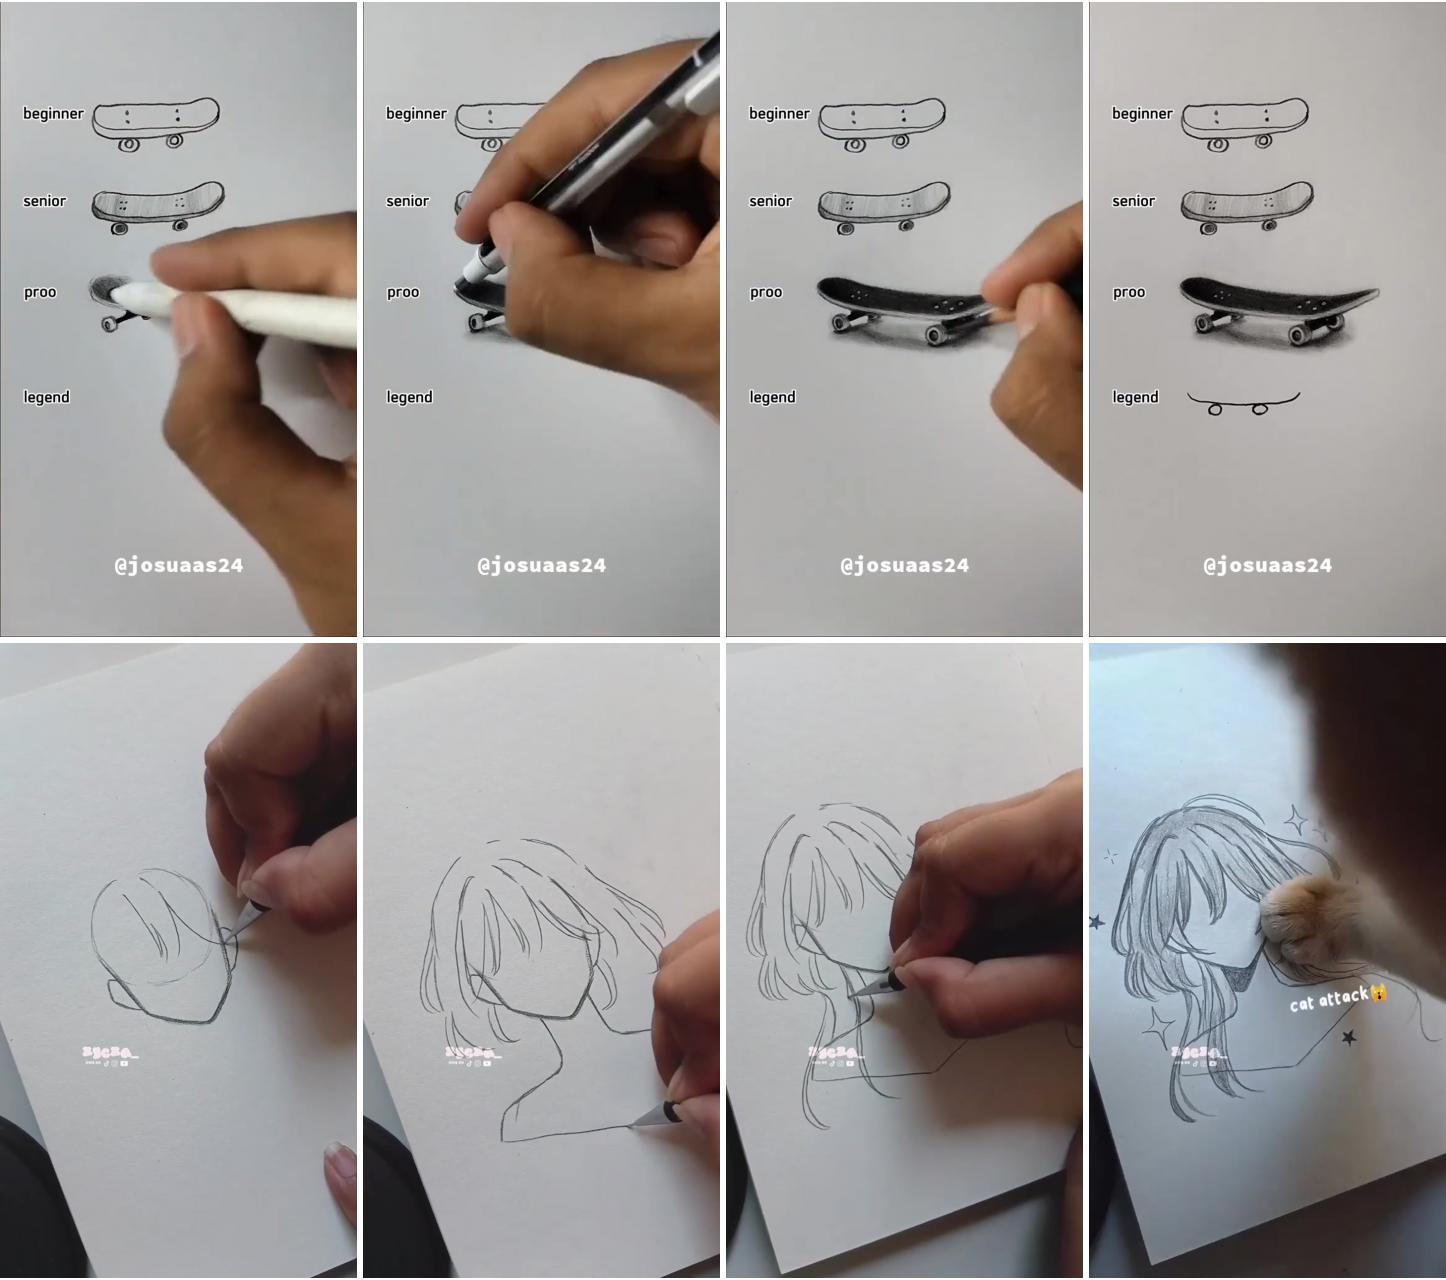 How to draw a skateboard | how to draw jellyfish haircut, art tutorial